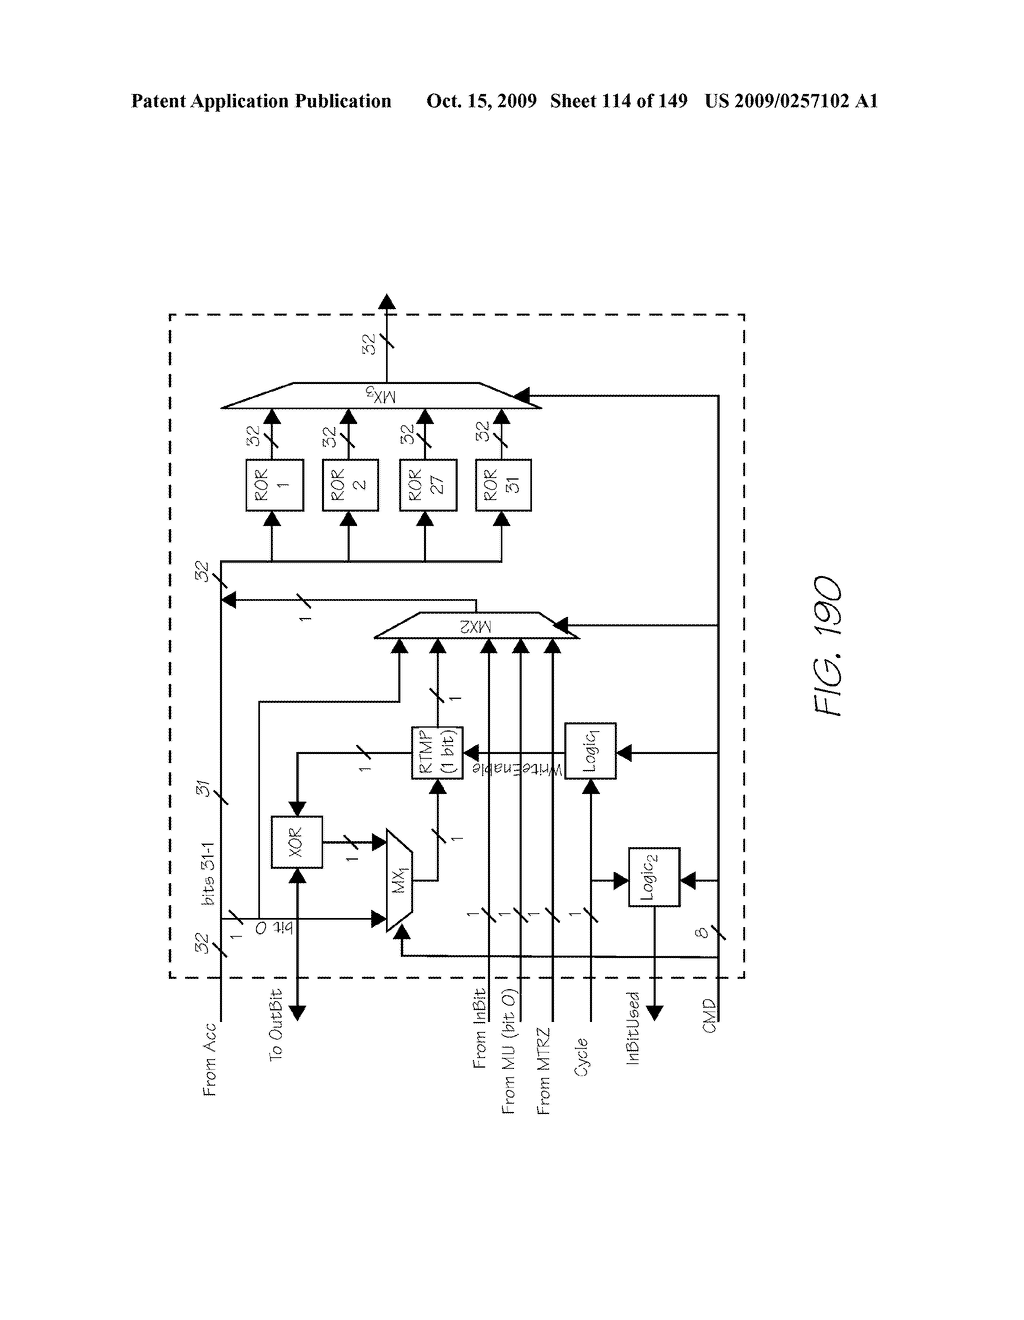 IMAGE PROCESSING APPARATUS HAVING CARD READER FOR APPLYING EFFECTS STORED ON A CARD TO A STORED IMAGE - diagram, schematic, and image 115